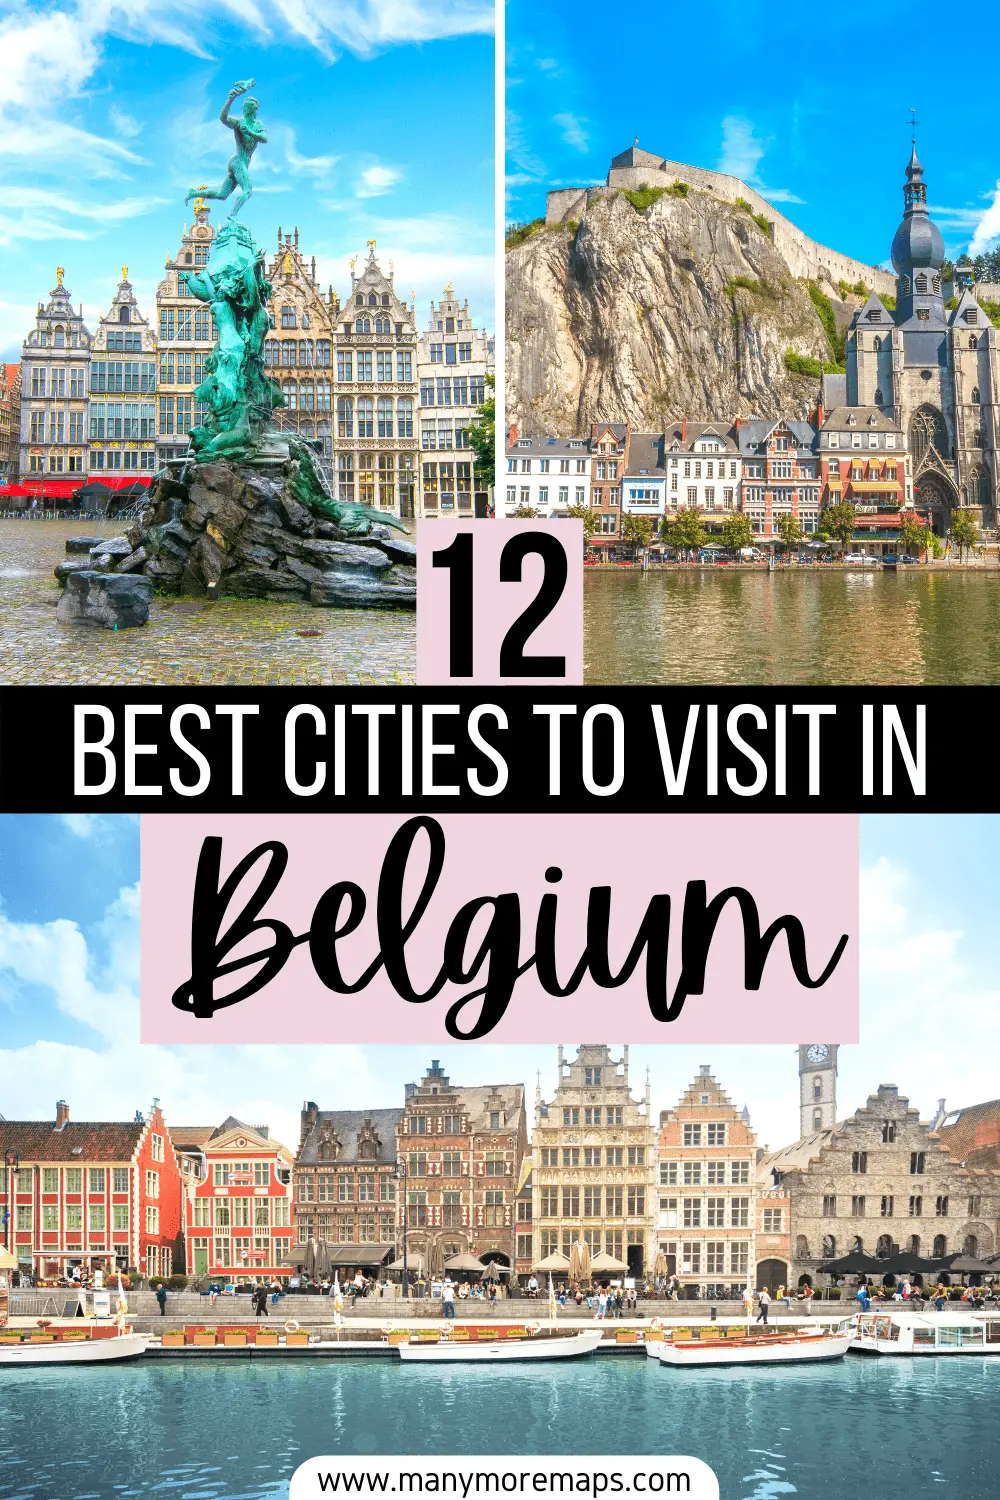 Looking to places to add to your Belgium itinerary? Then check out this post of the best and most beautiful cities and places to visit in Belgium, Europe, including Brussels, Ghent, Bruges, Antwerp and Dinant, Belgium.